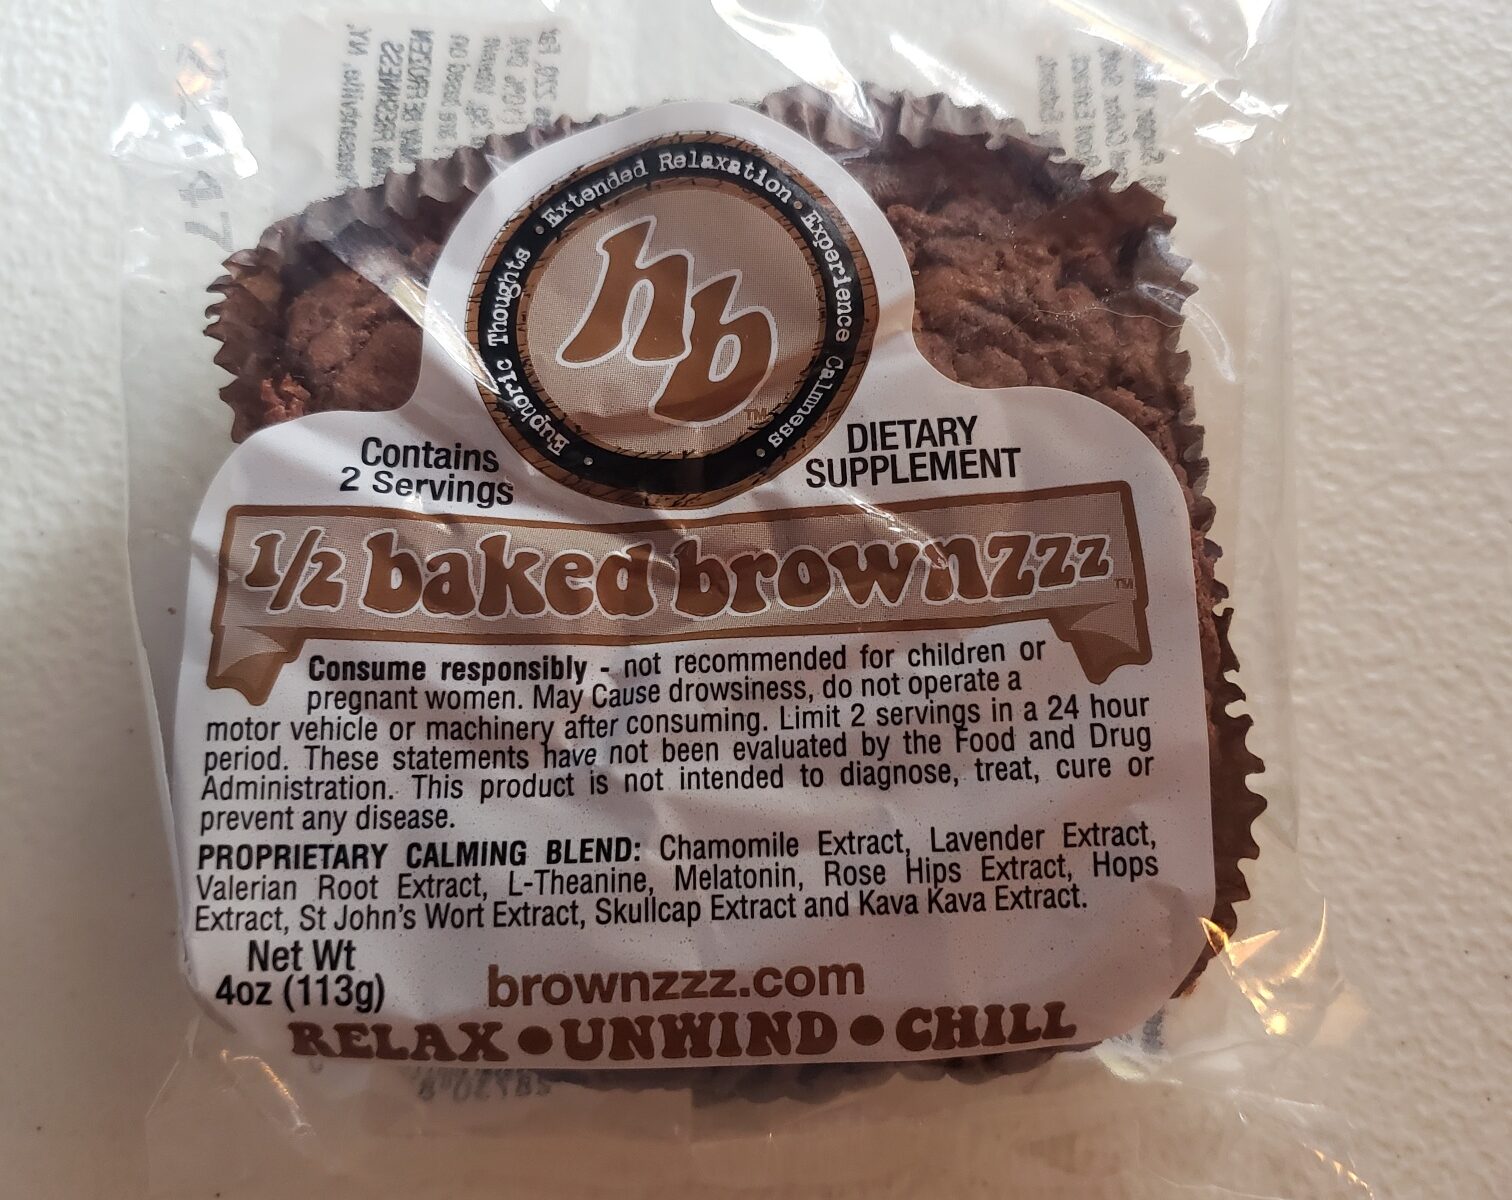 1/2 baked brownzzz